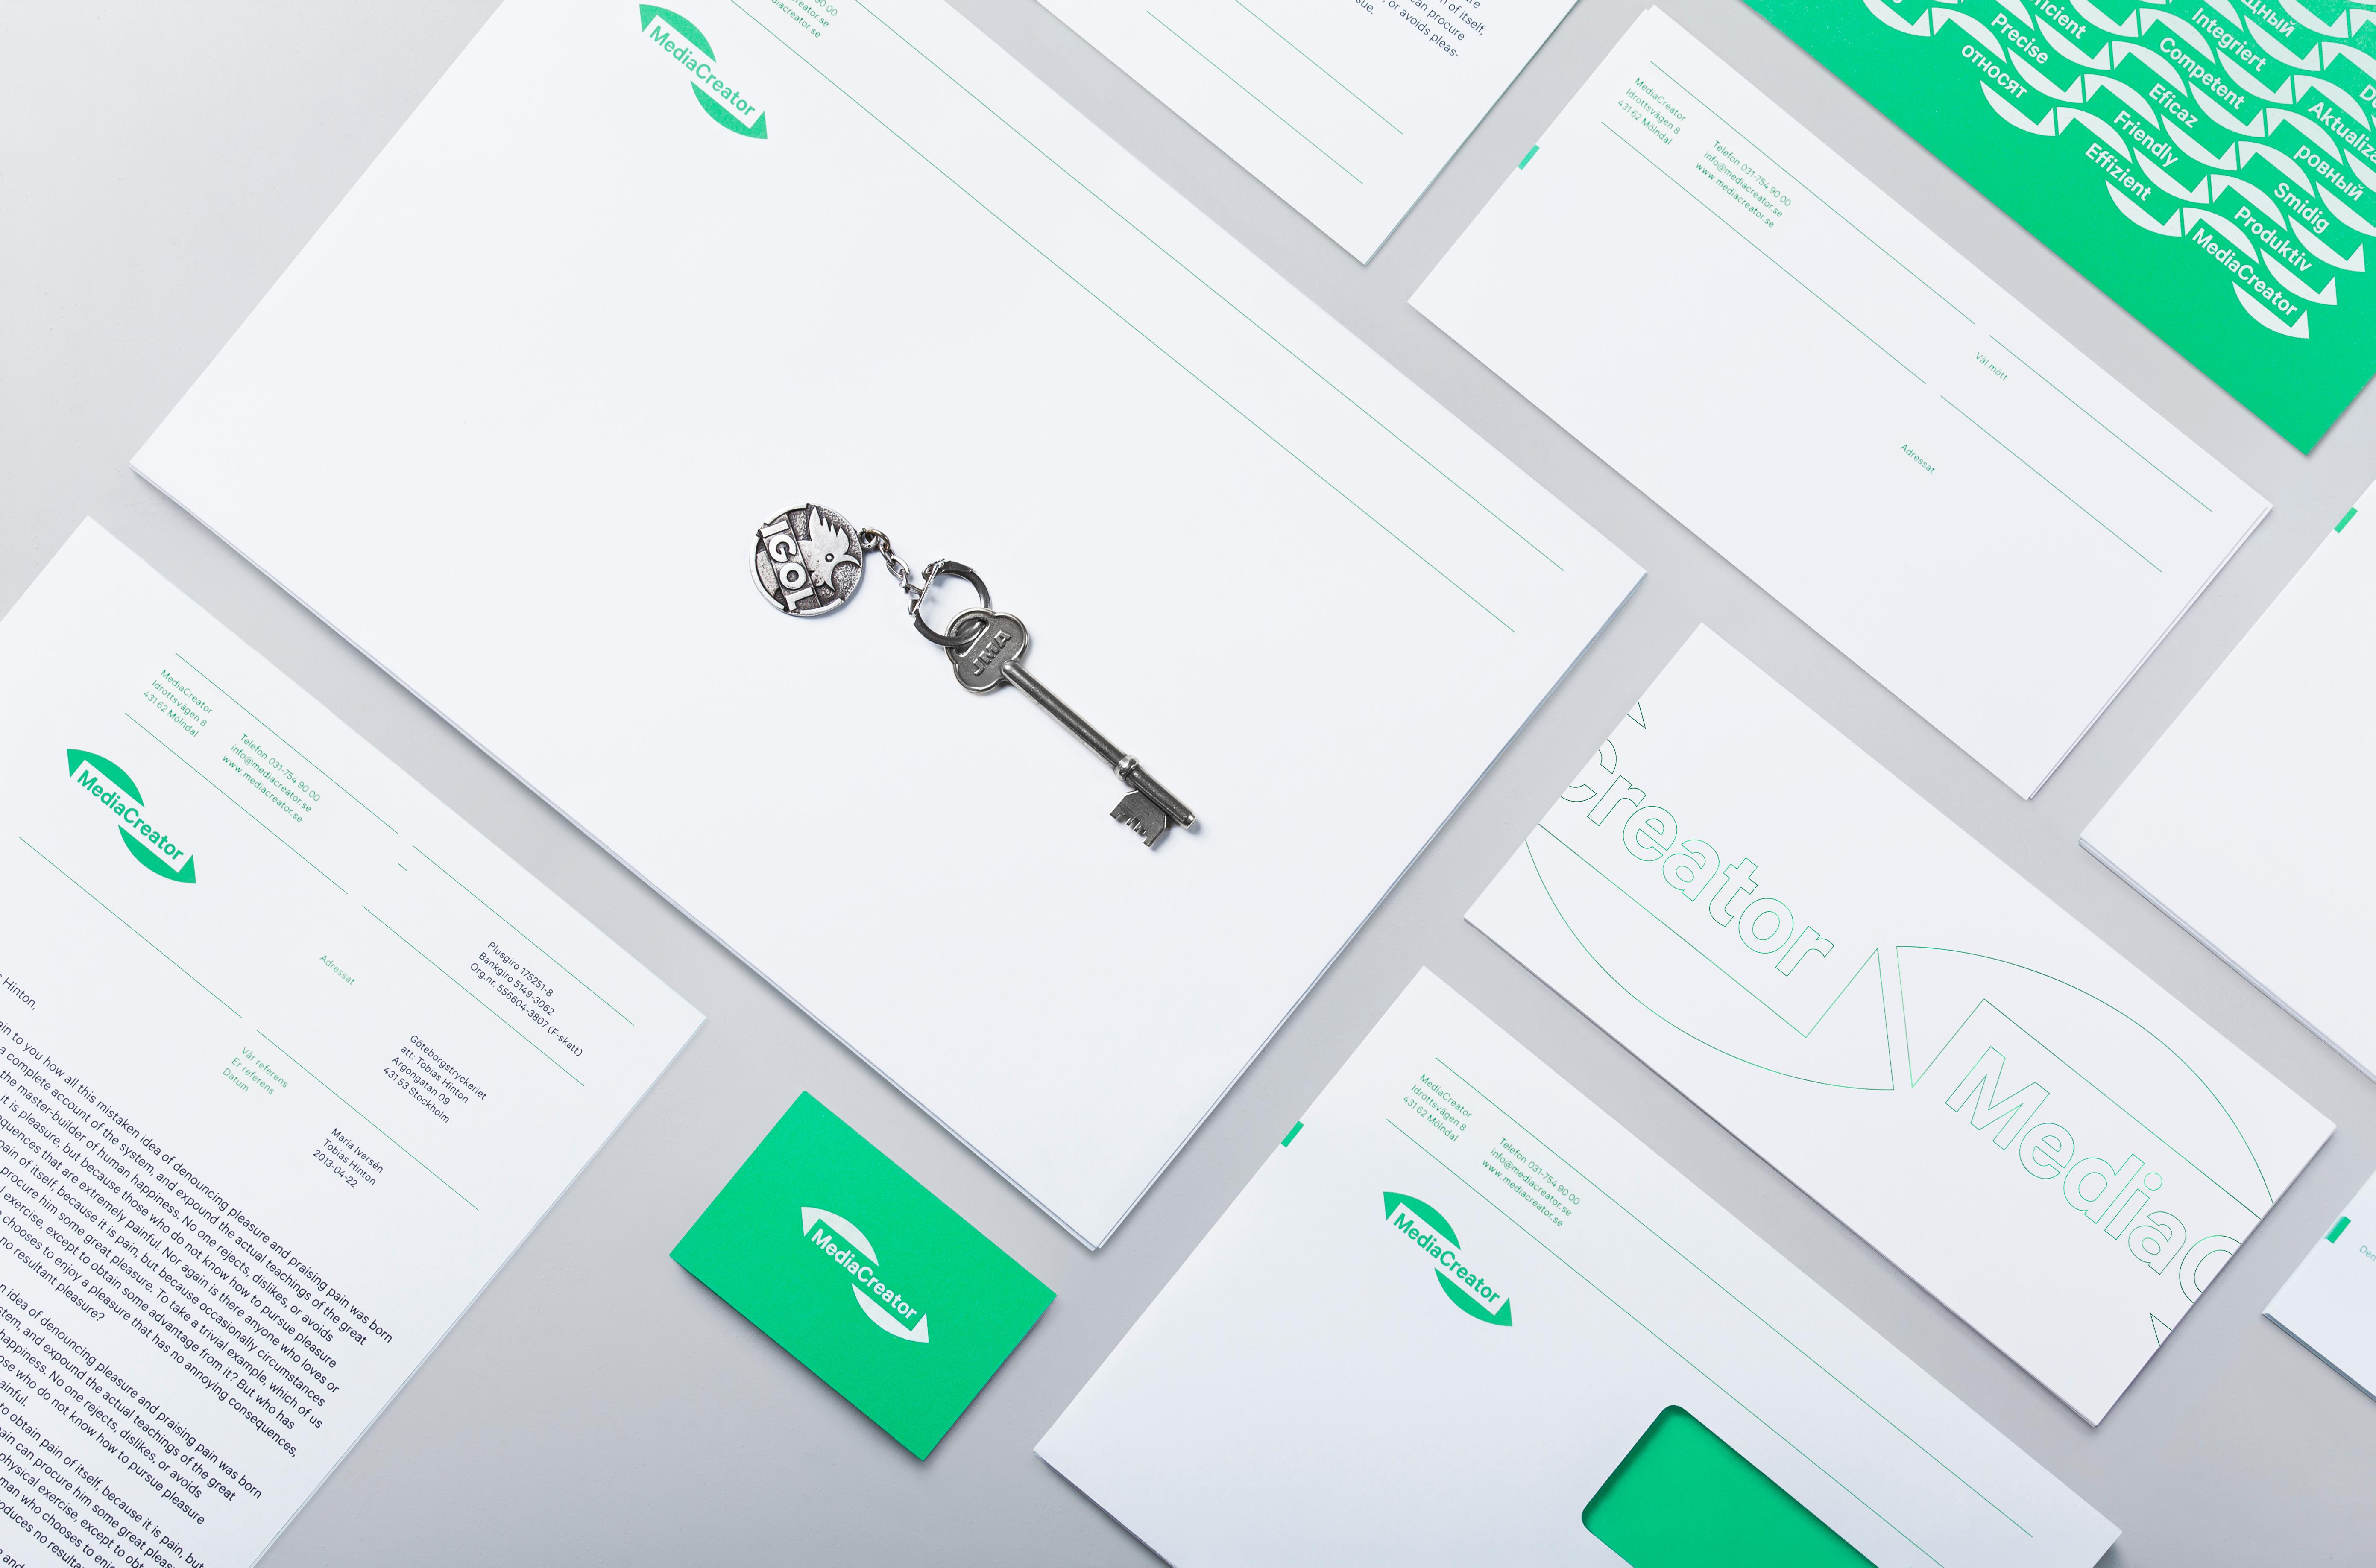 Logo and stationery with fluorescent green ink detail designed by Lundgren+Lindqvist for Swedish print production and project management company MediaCreator